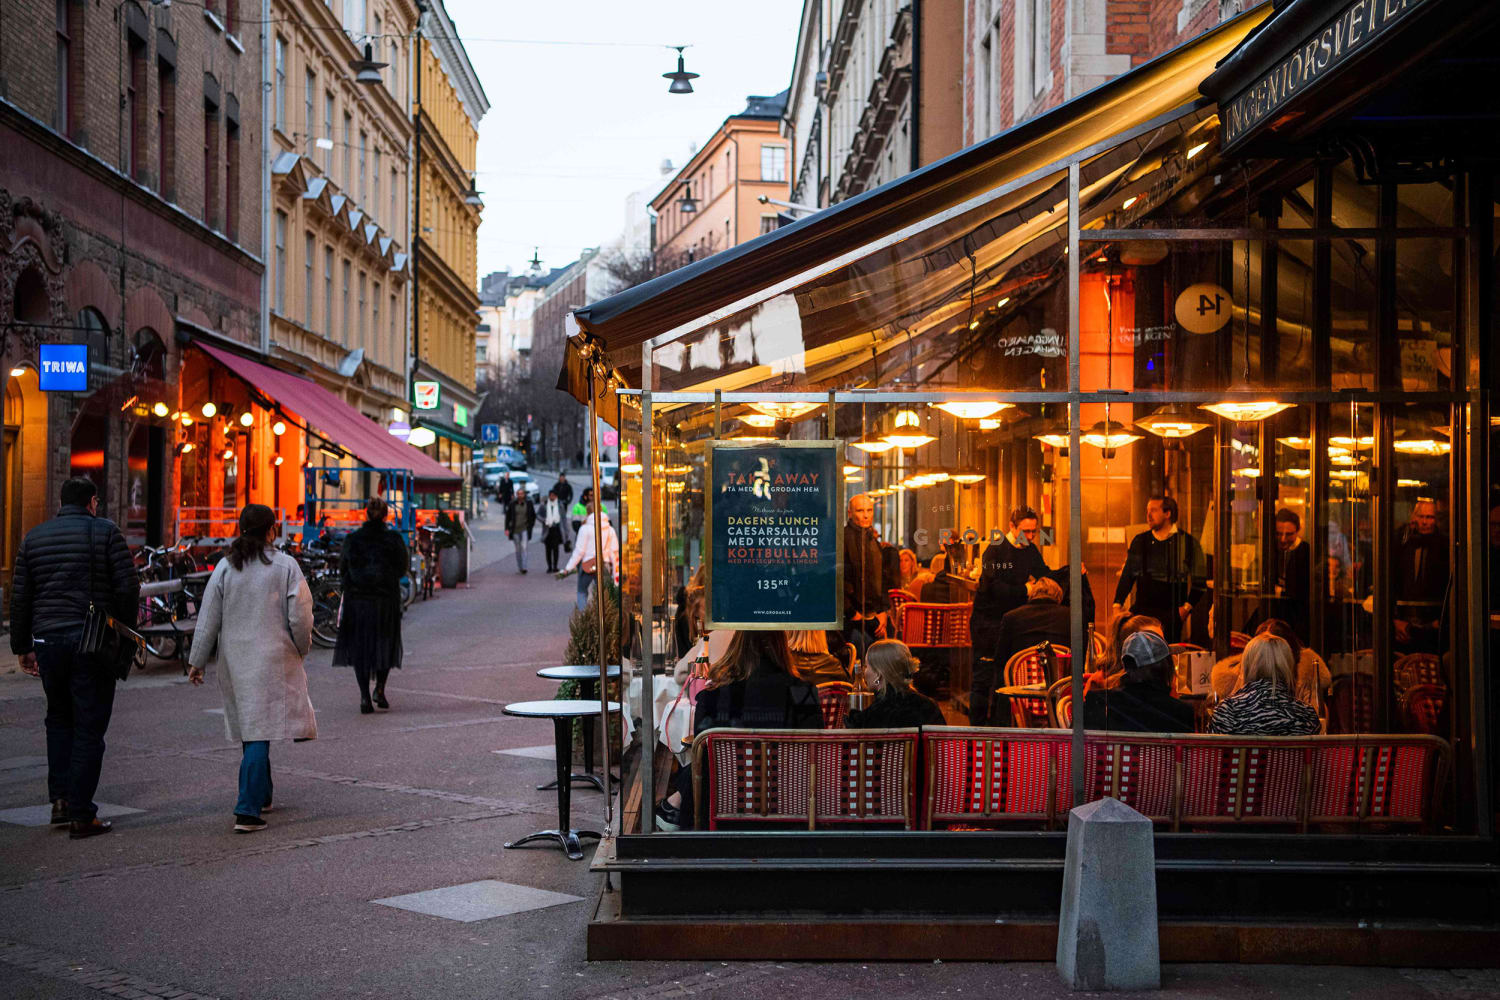 Sweden defies lockdown trend, bets on residents acting responsibly